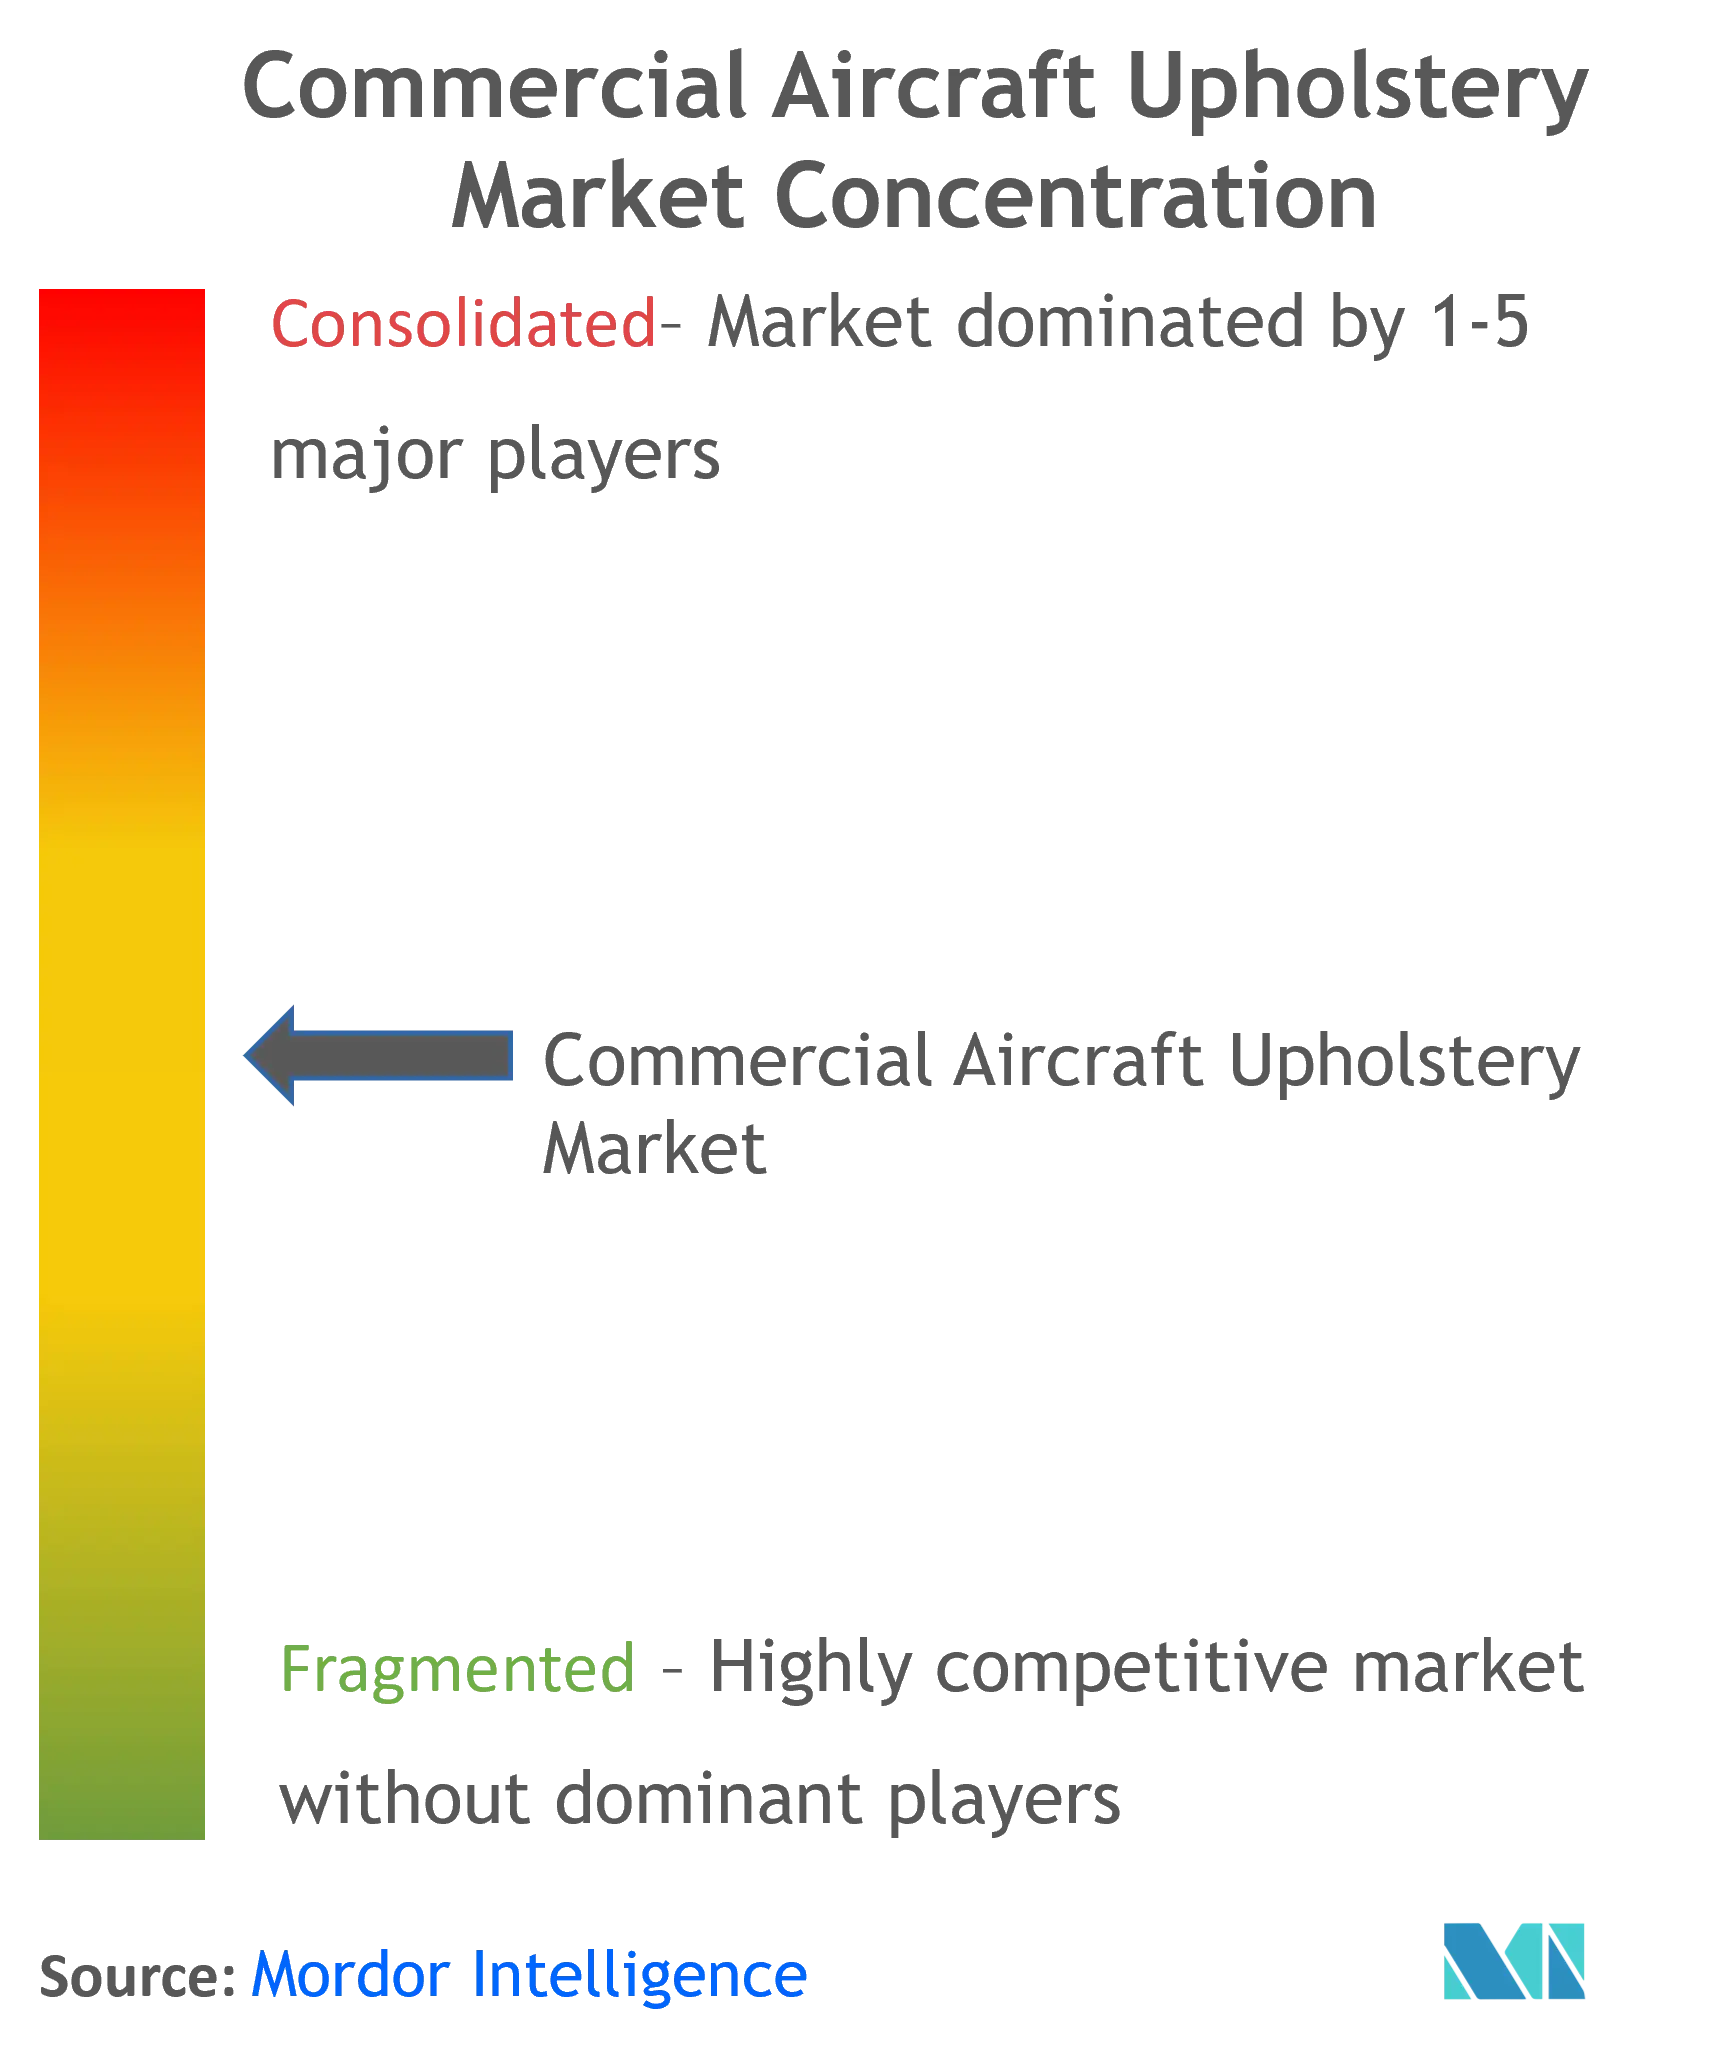 Commercial Aircraft Upholstery Market Concentration